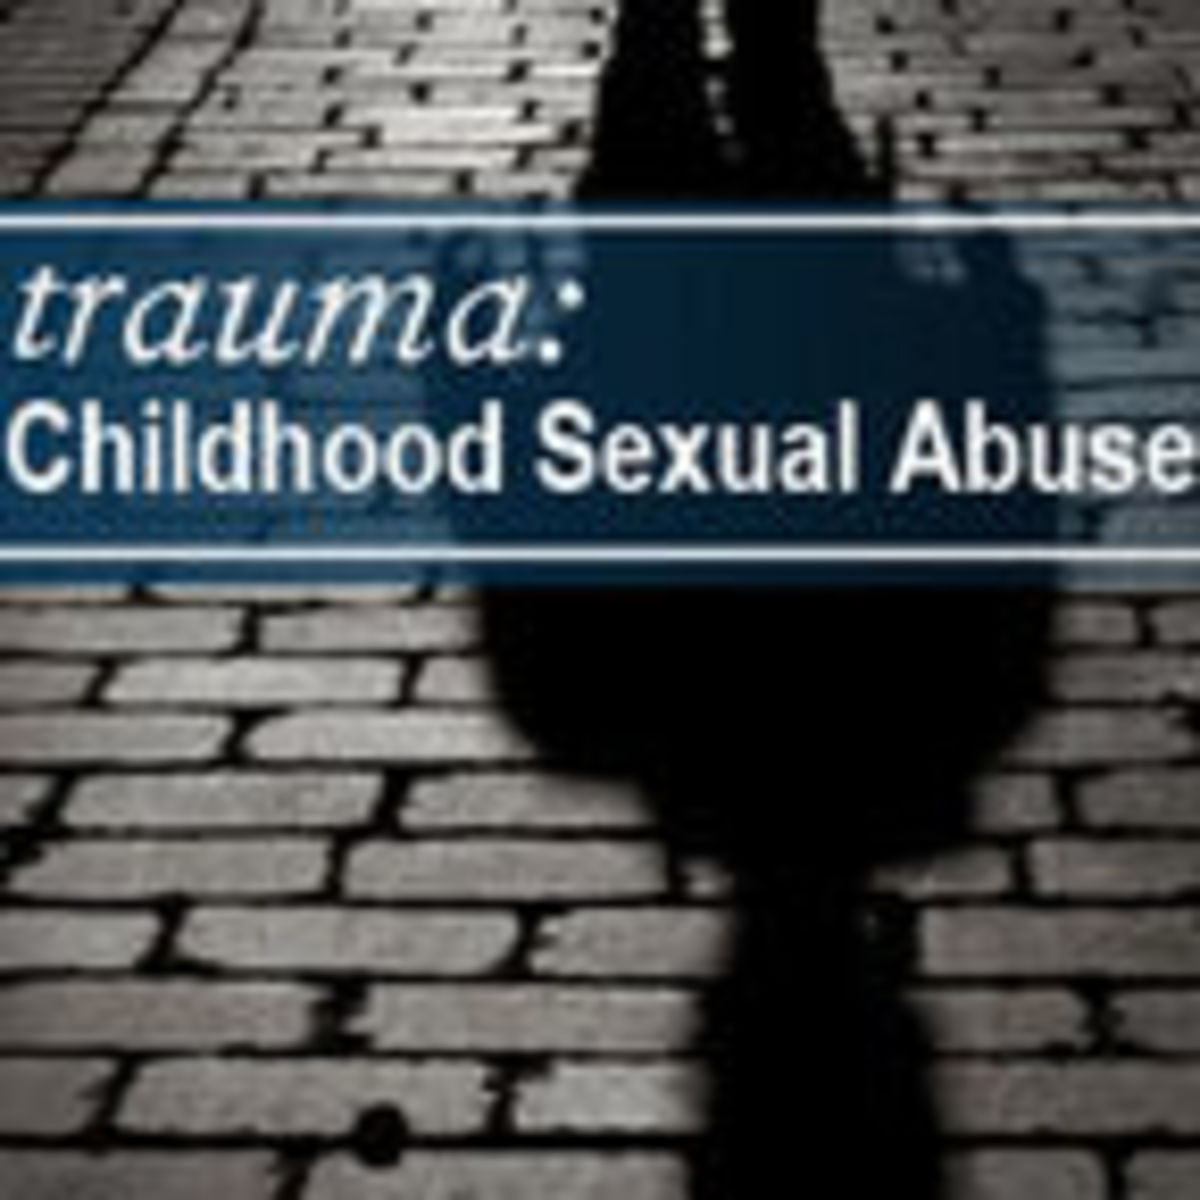 Sleeping Sister Gets Molested By Brother And Liked It - Trauma: Childhood Sexual Abuse | Psychology Today